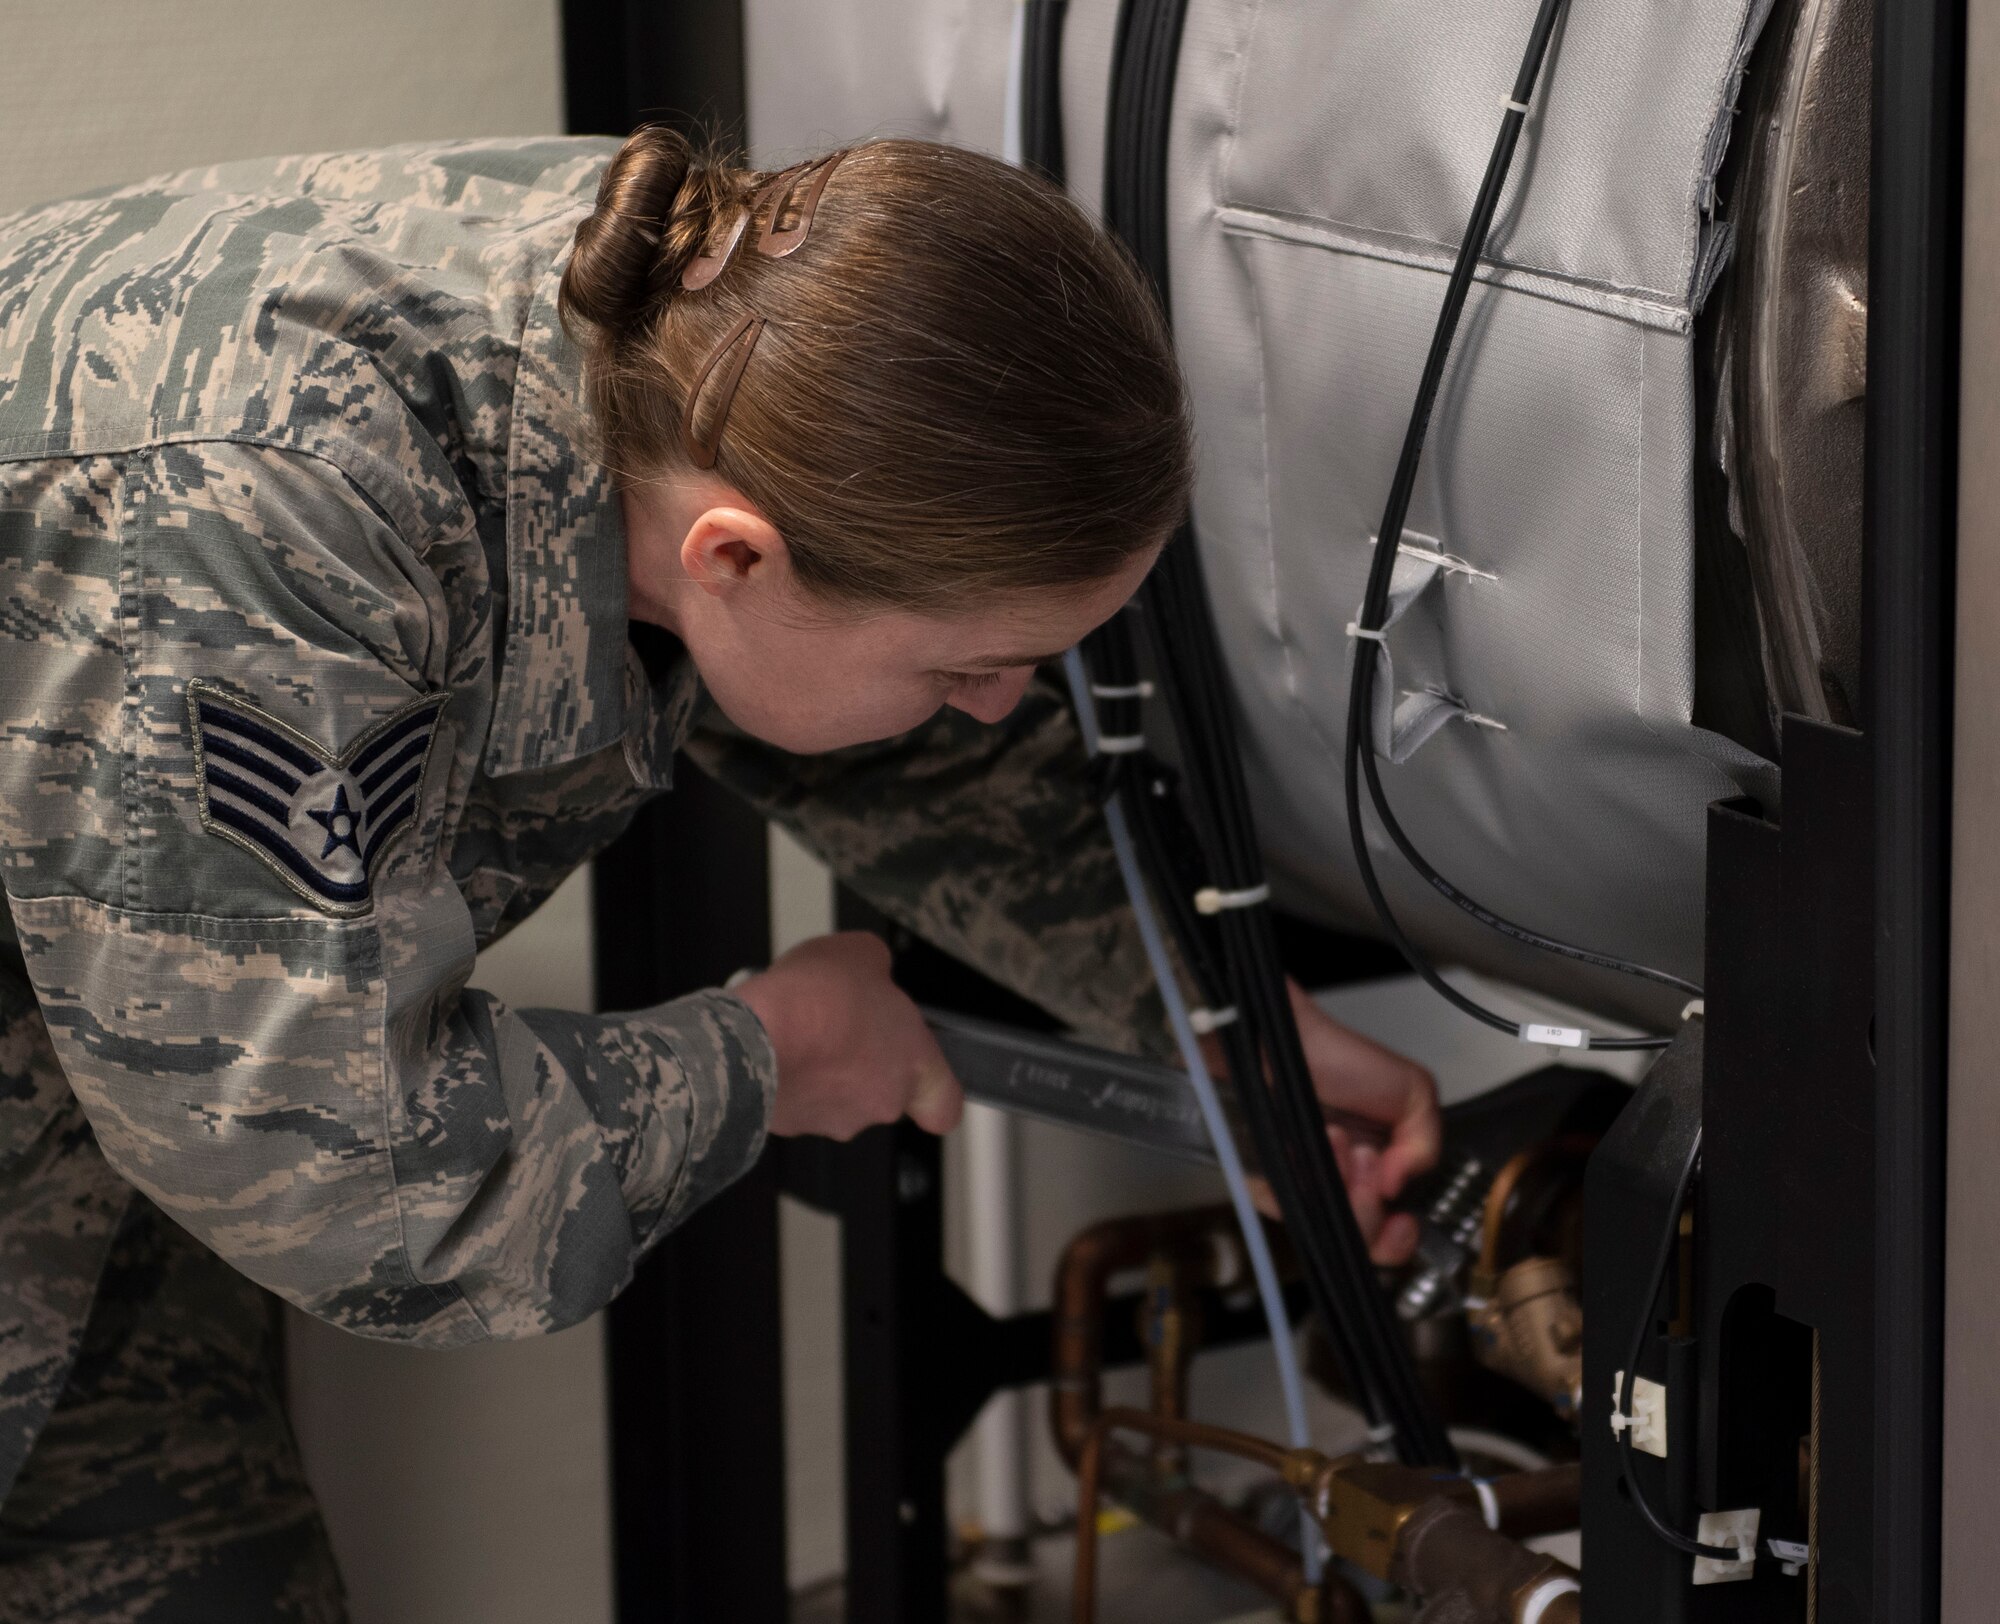 U.S. Air Force Staff Sgt. Heather Merrill, 52nd Medical Group biomedical equipment technician, tightens a bolt on a sterilizer at Spangdahlem Air Base, Germany, April 1, 2020. The sterilizer is the final step medical tools go through before returning to their respective departments. (U.S. Air Force photo by Senior Airman Melody W. Howley)